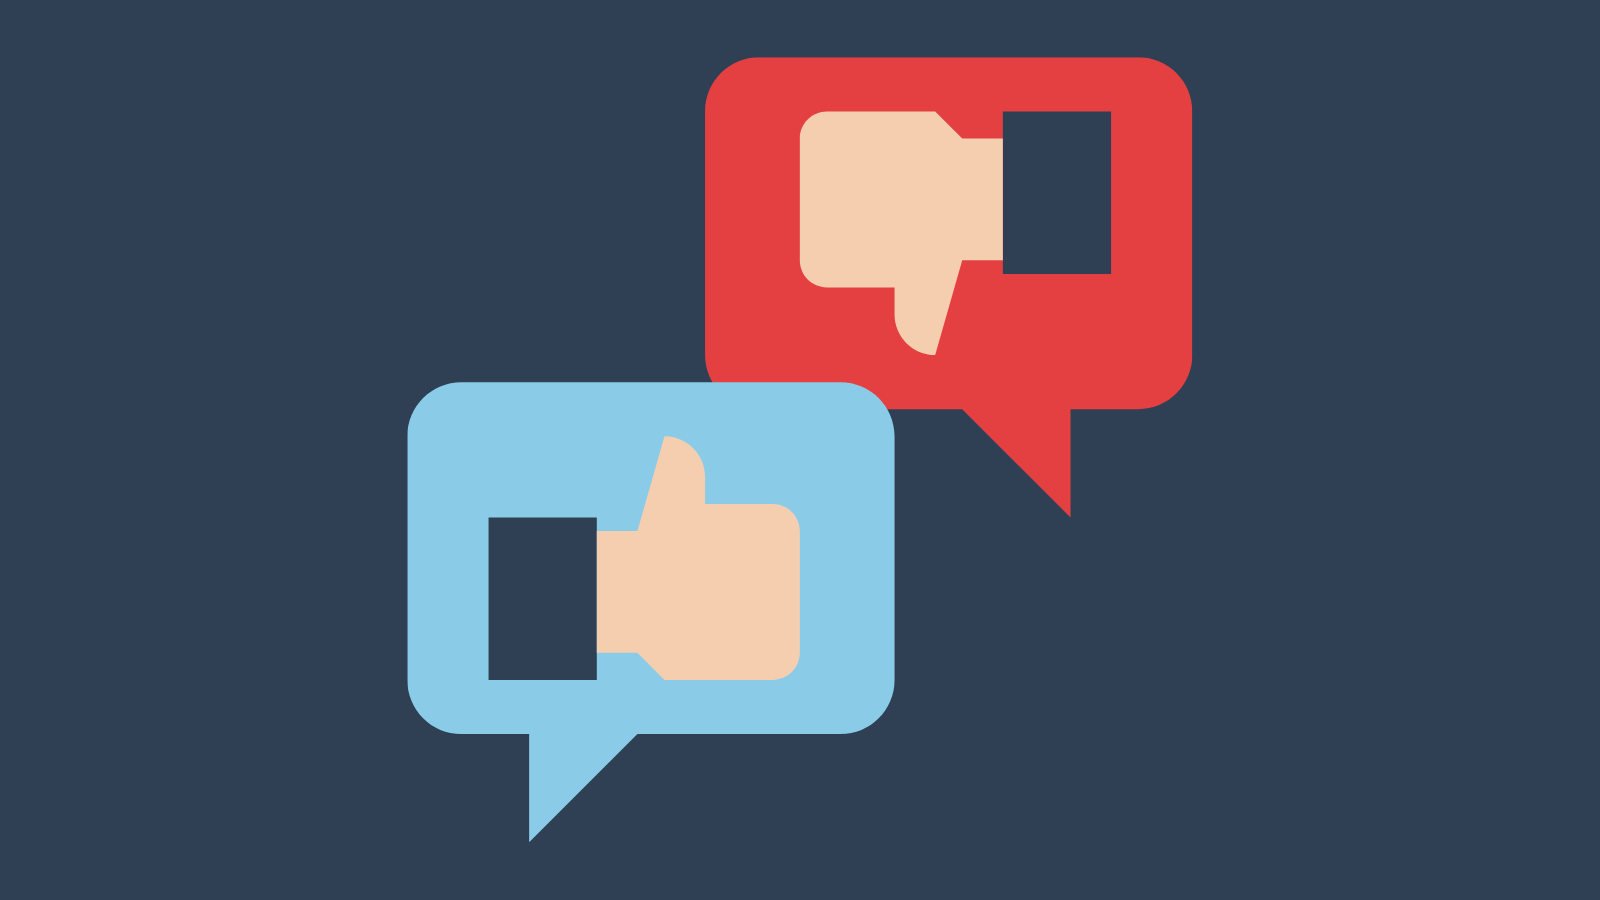 Speech bubbles with thumbs up and thumbs down icons inside them